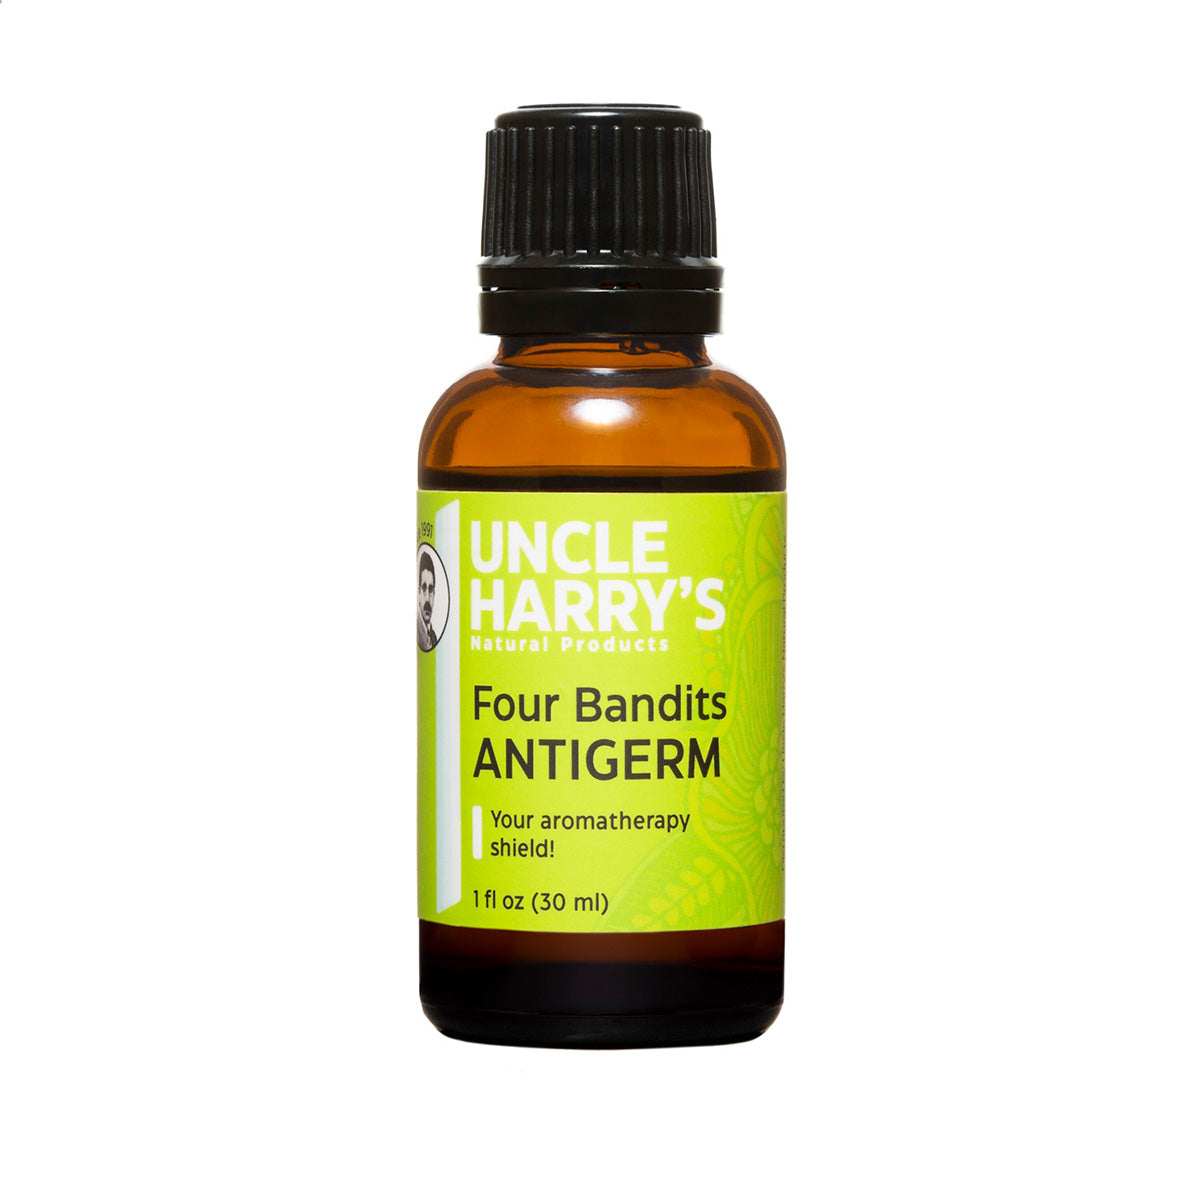 Four Bandits Anti-Germ – Uncle Harry's Natural Products